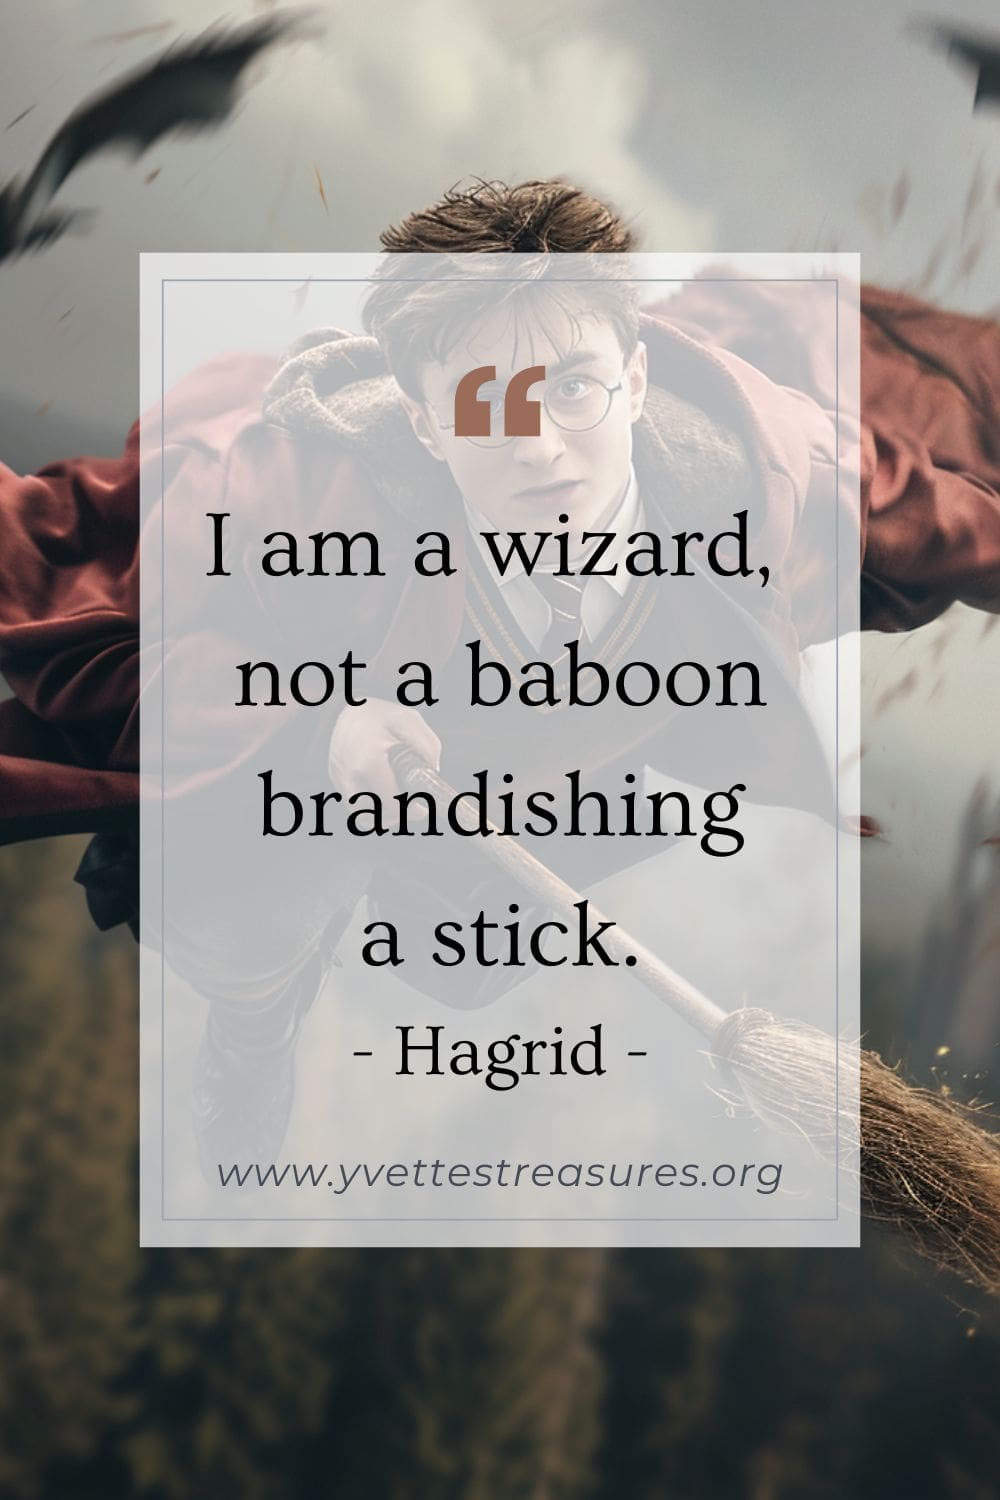 I am a wizard not a boboon brandishing a stick by Hagrid